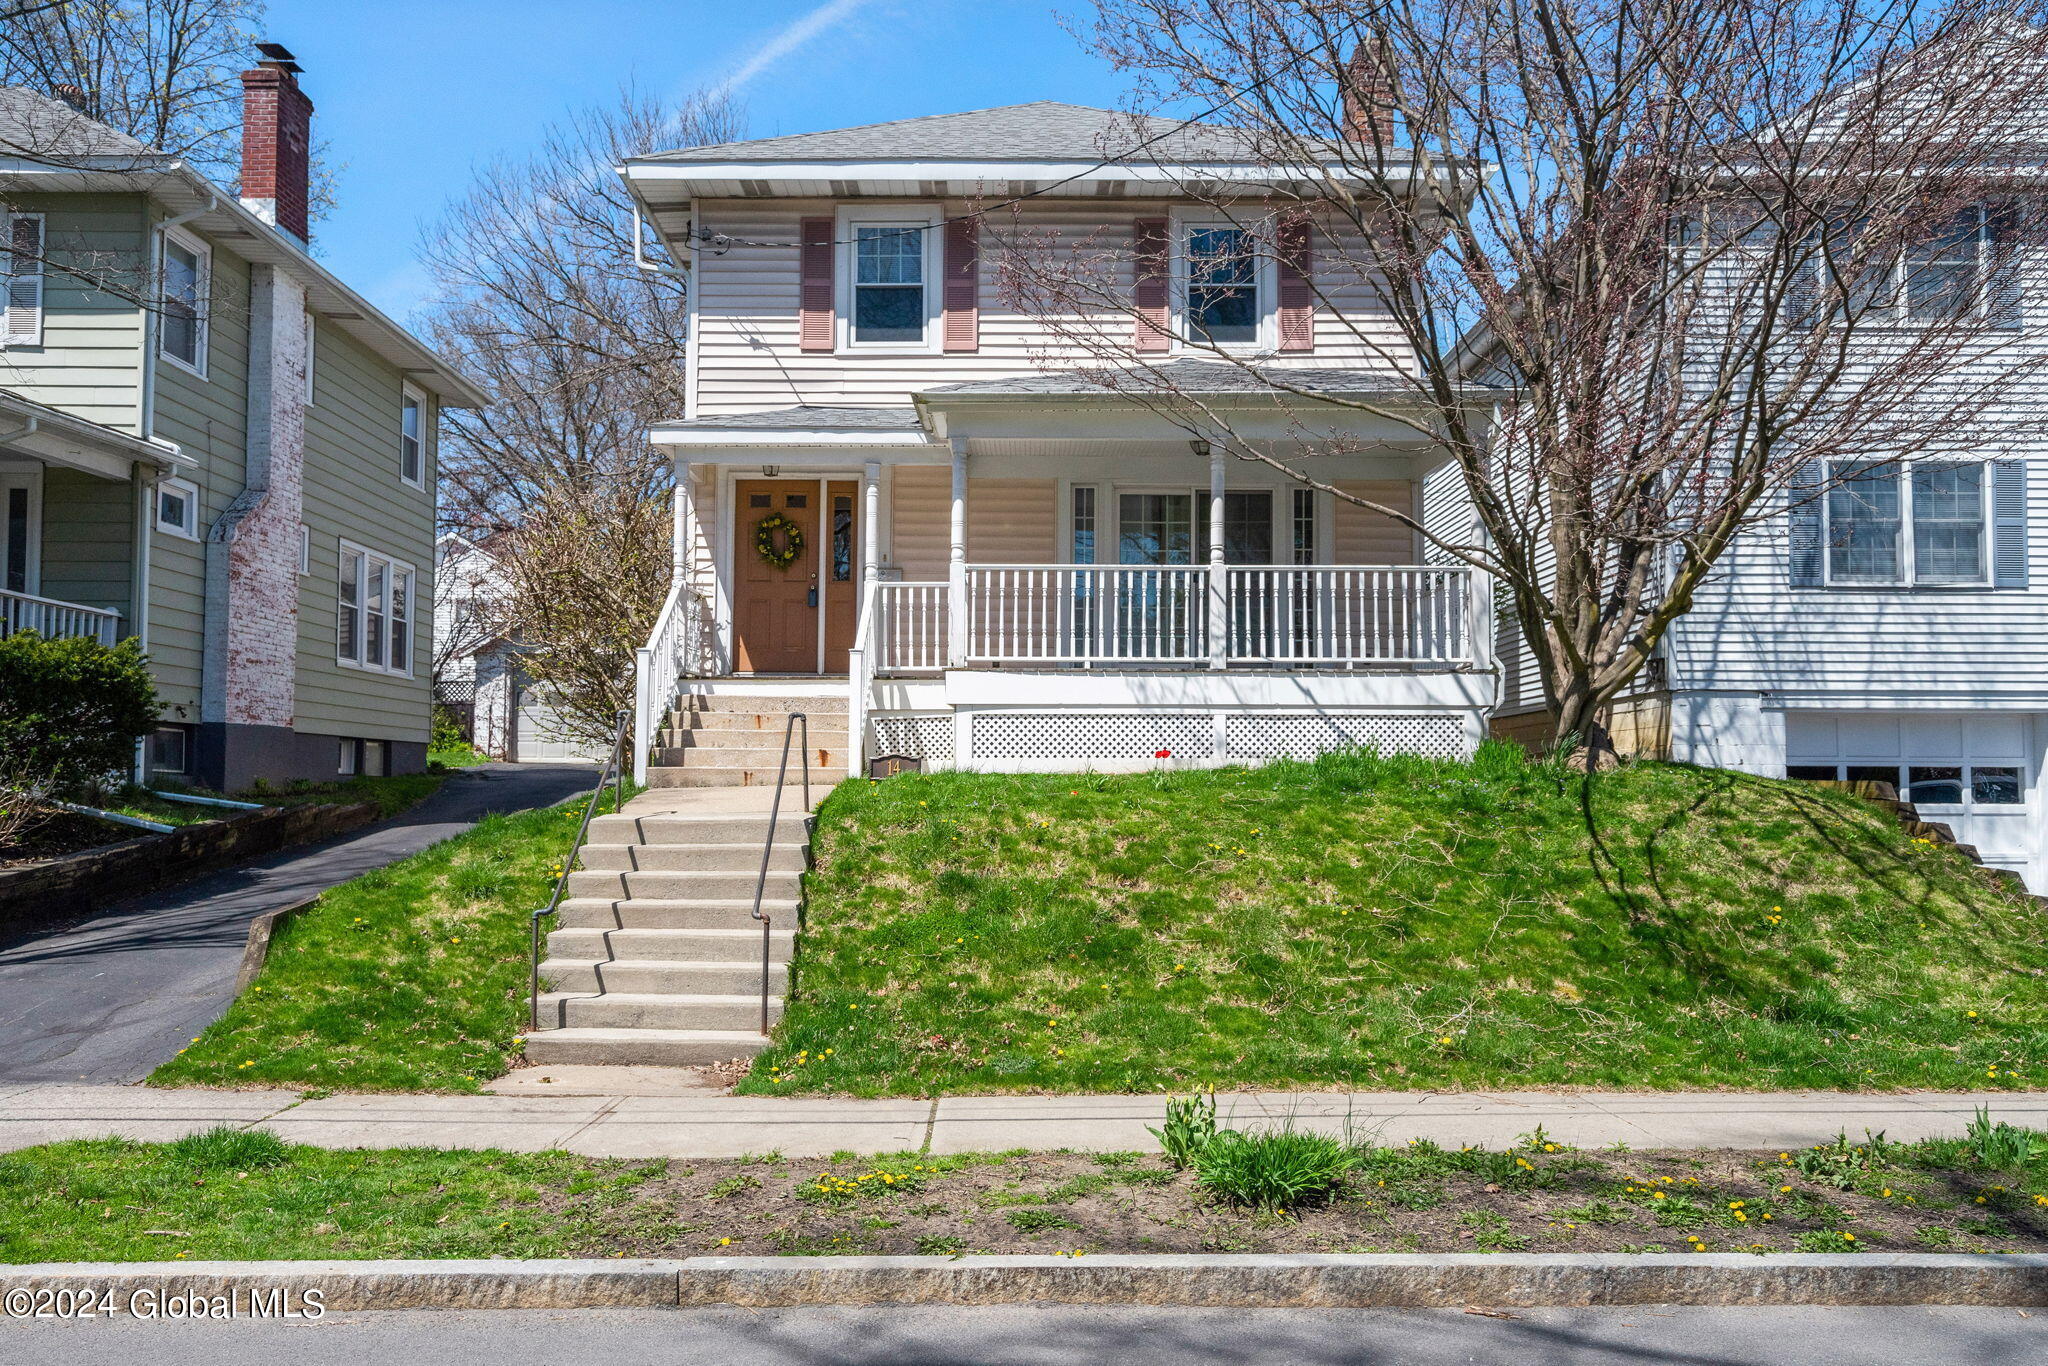 1-web-or-mls-14-fairlawn-ave